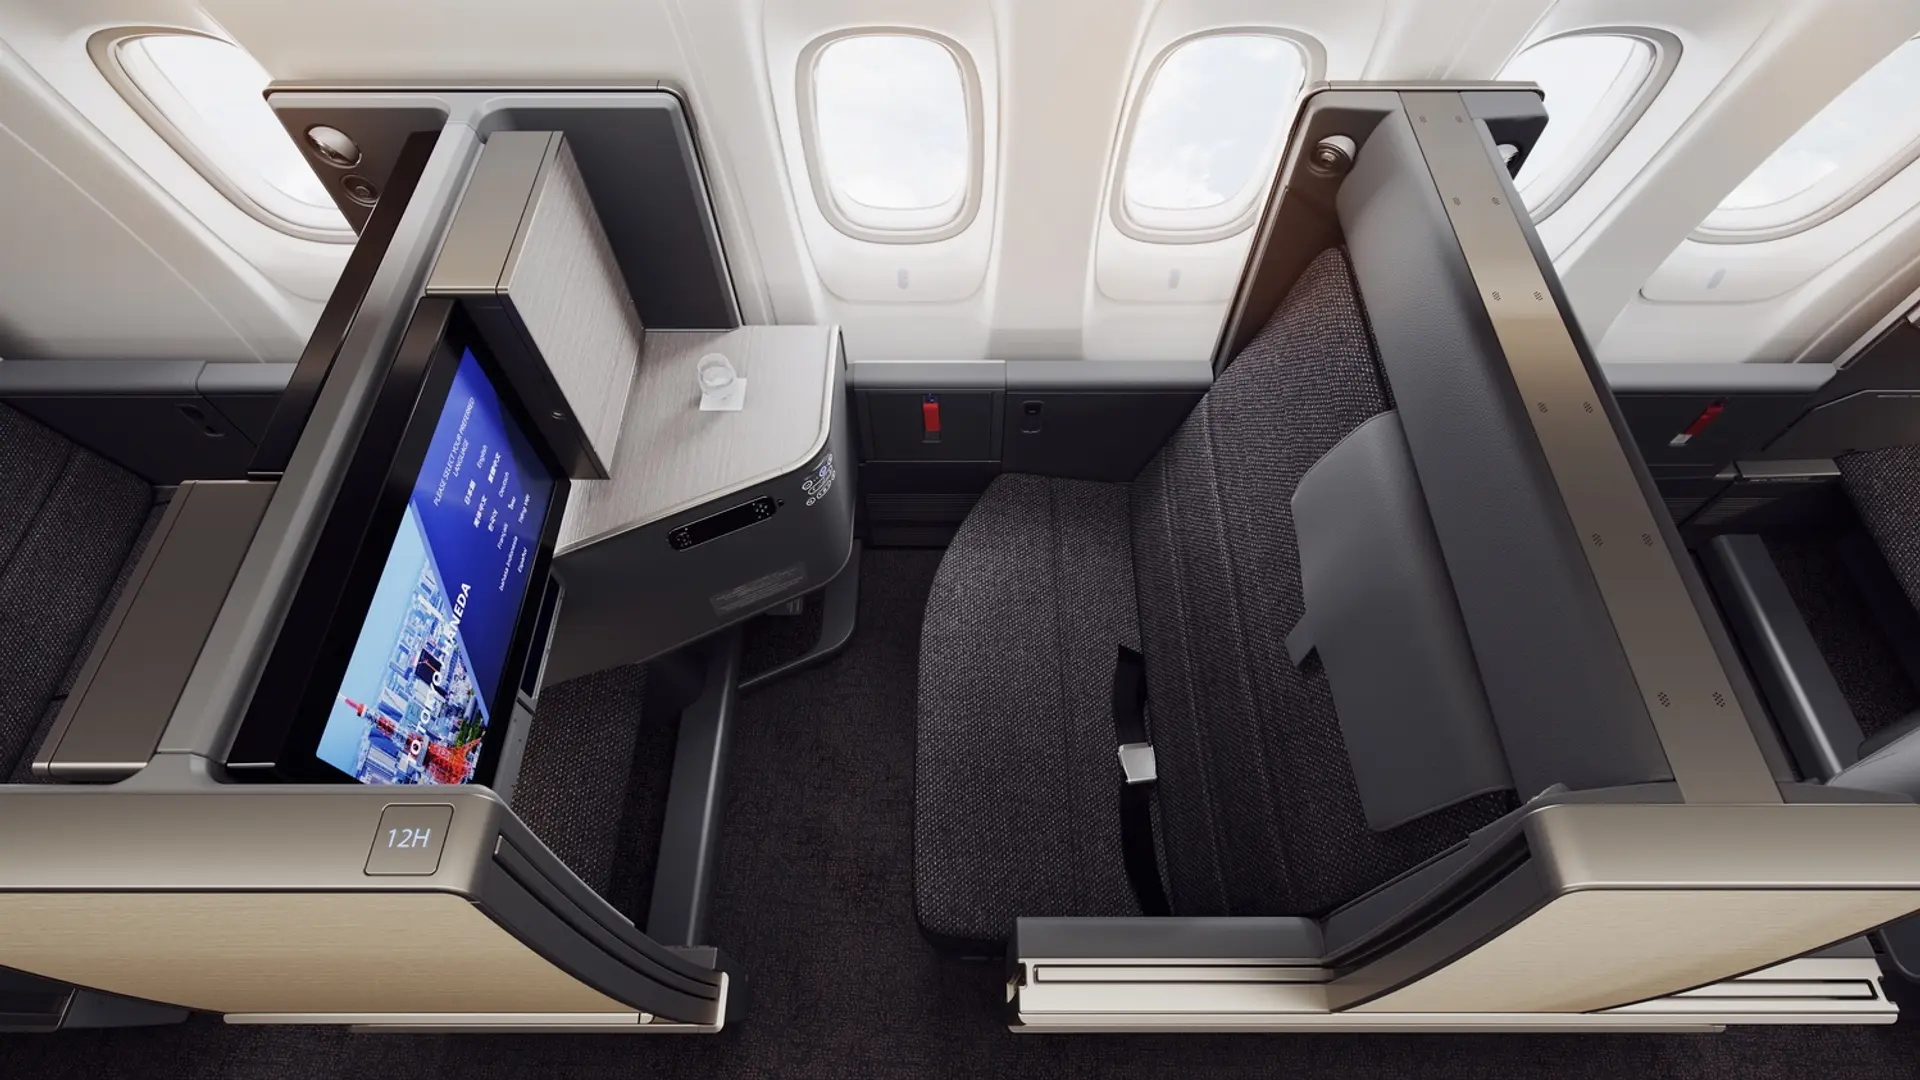 Luxurious businessclass seat with a black and gold finish with a smart screen facing the seat.